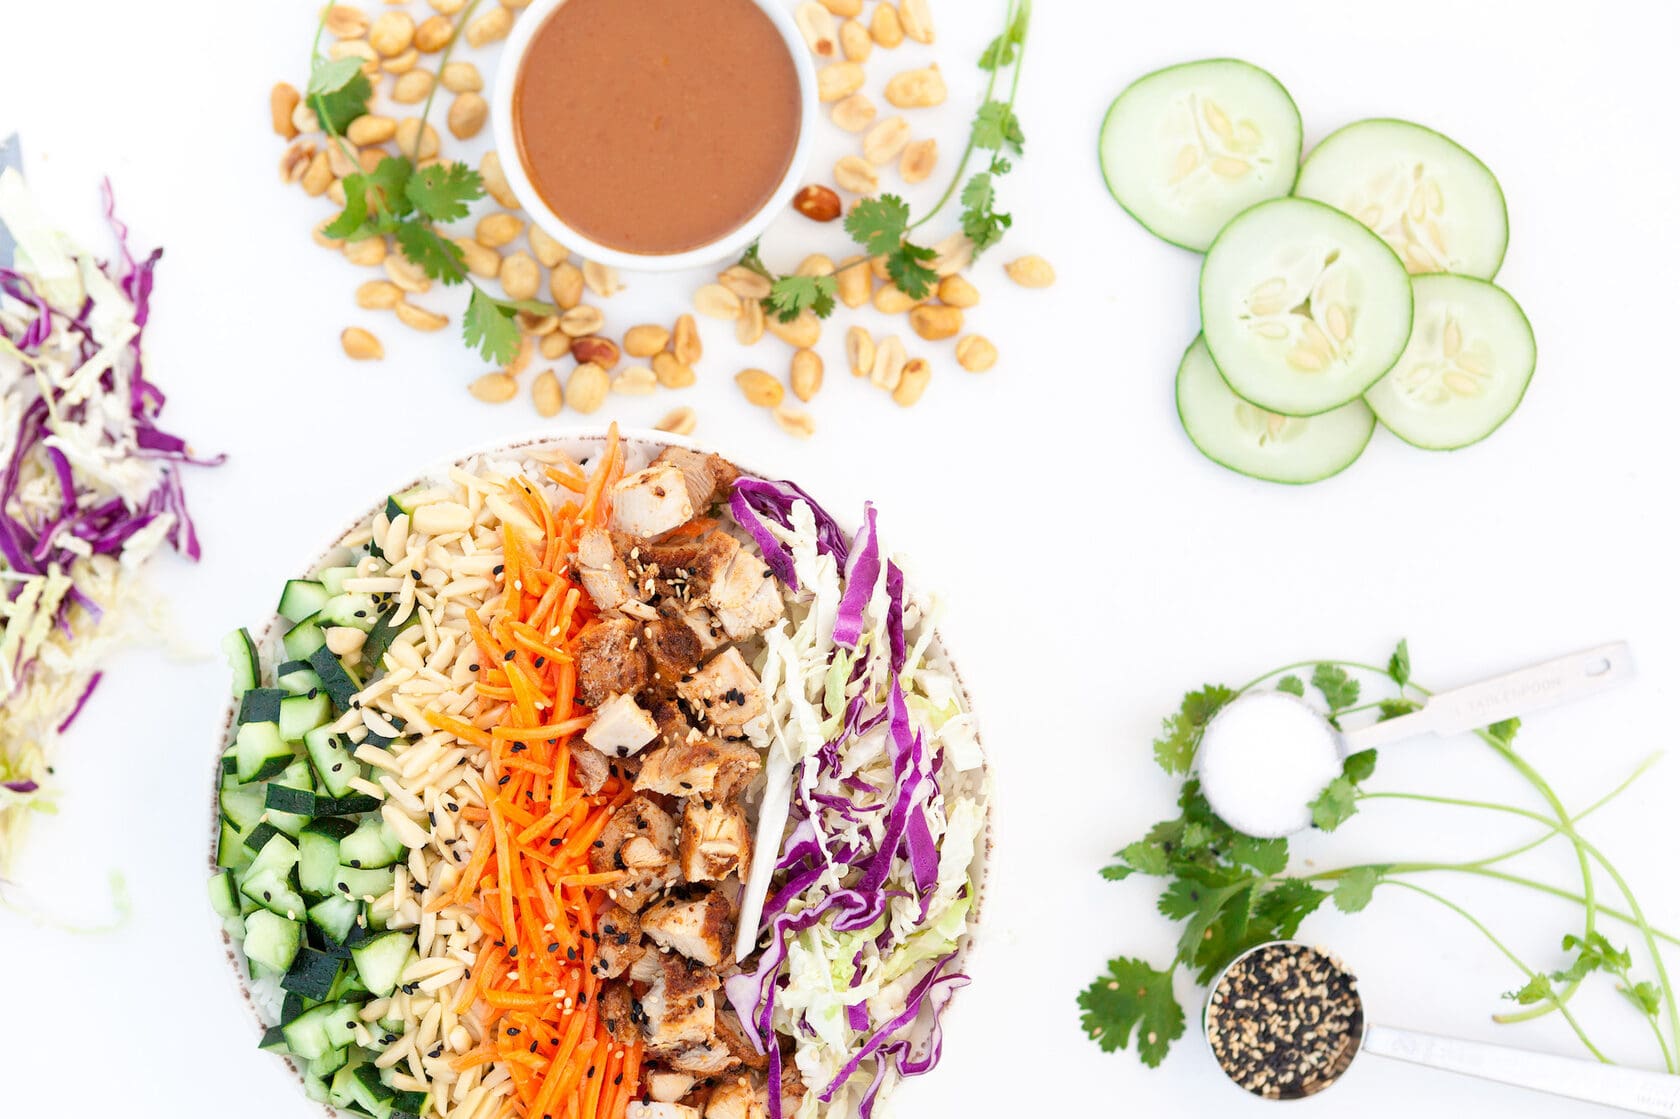 Our Favorite Healthy Restaurants on the inKind App - Currito